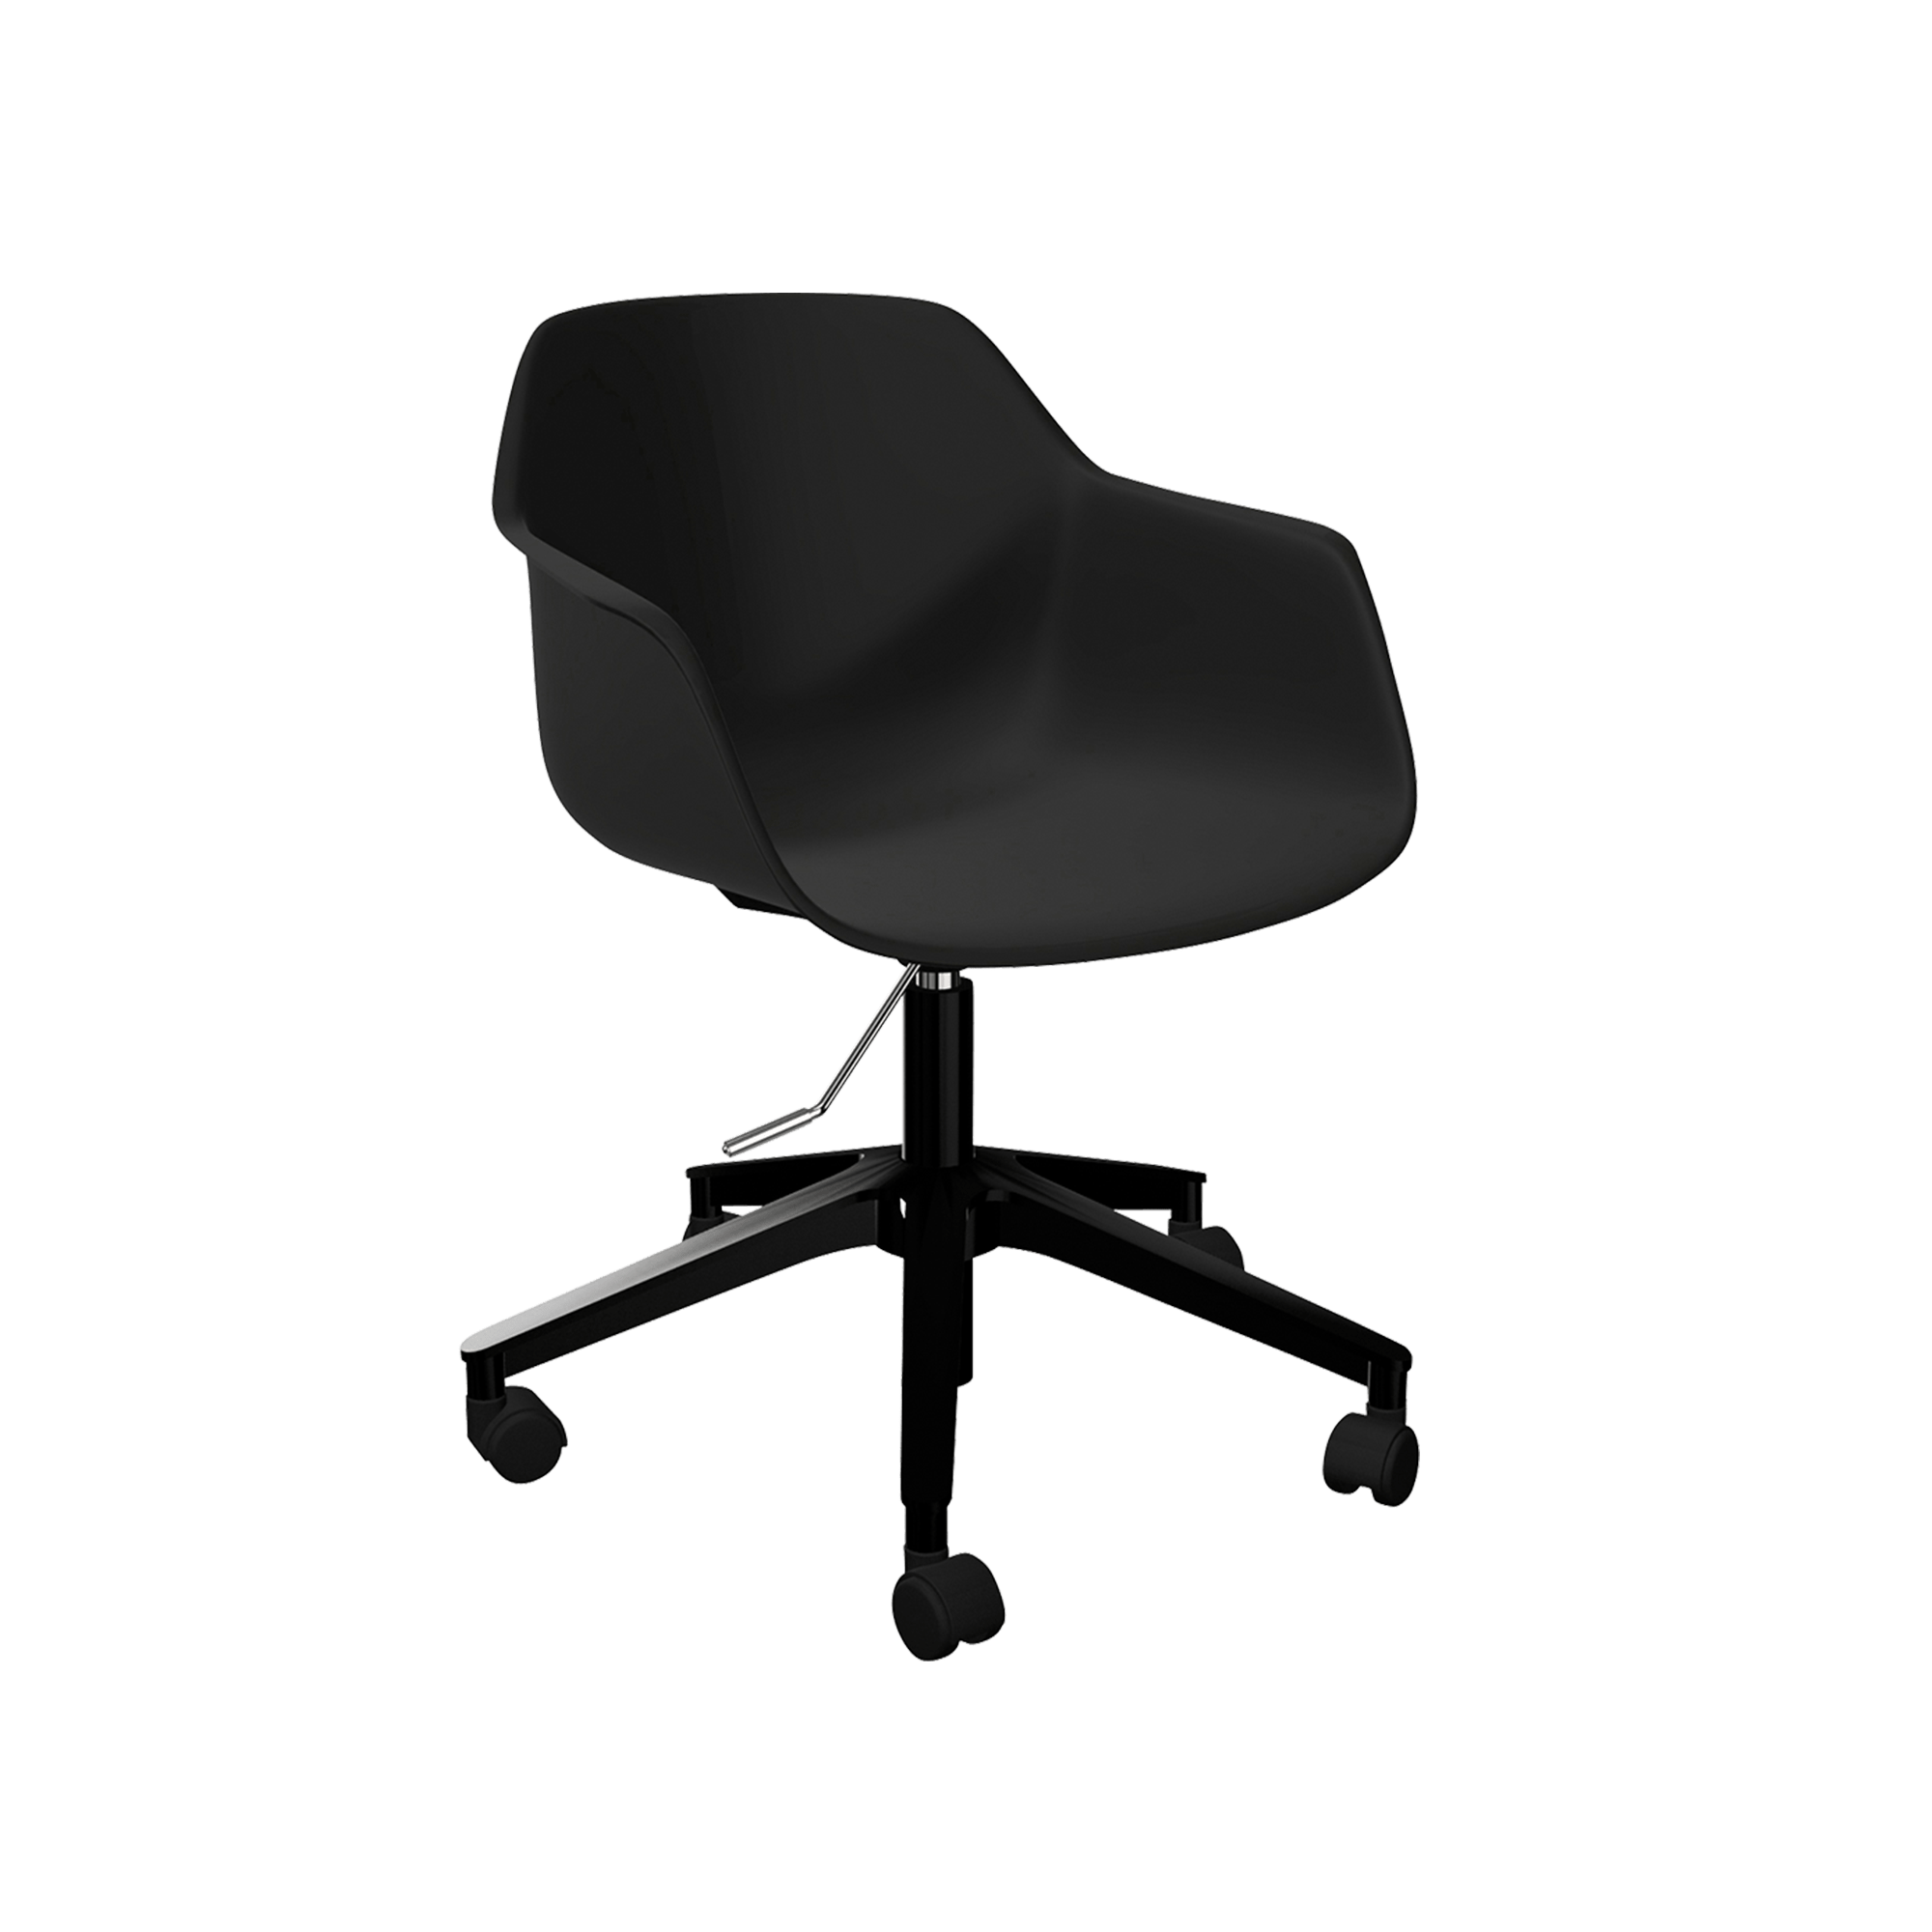 A black office chair on casters